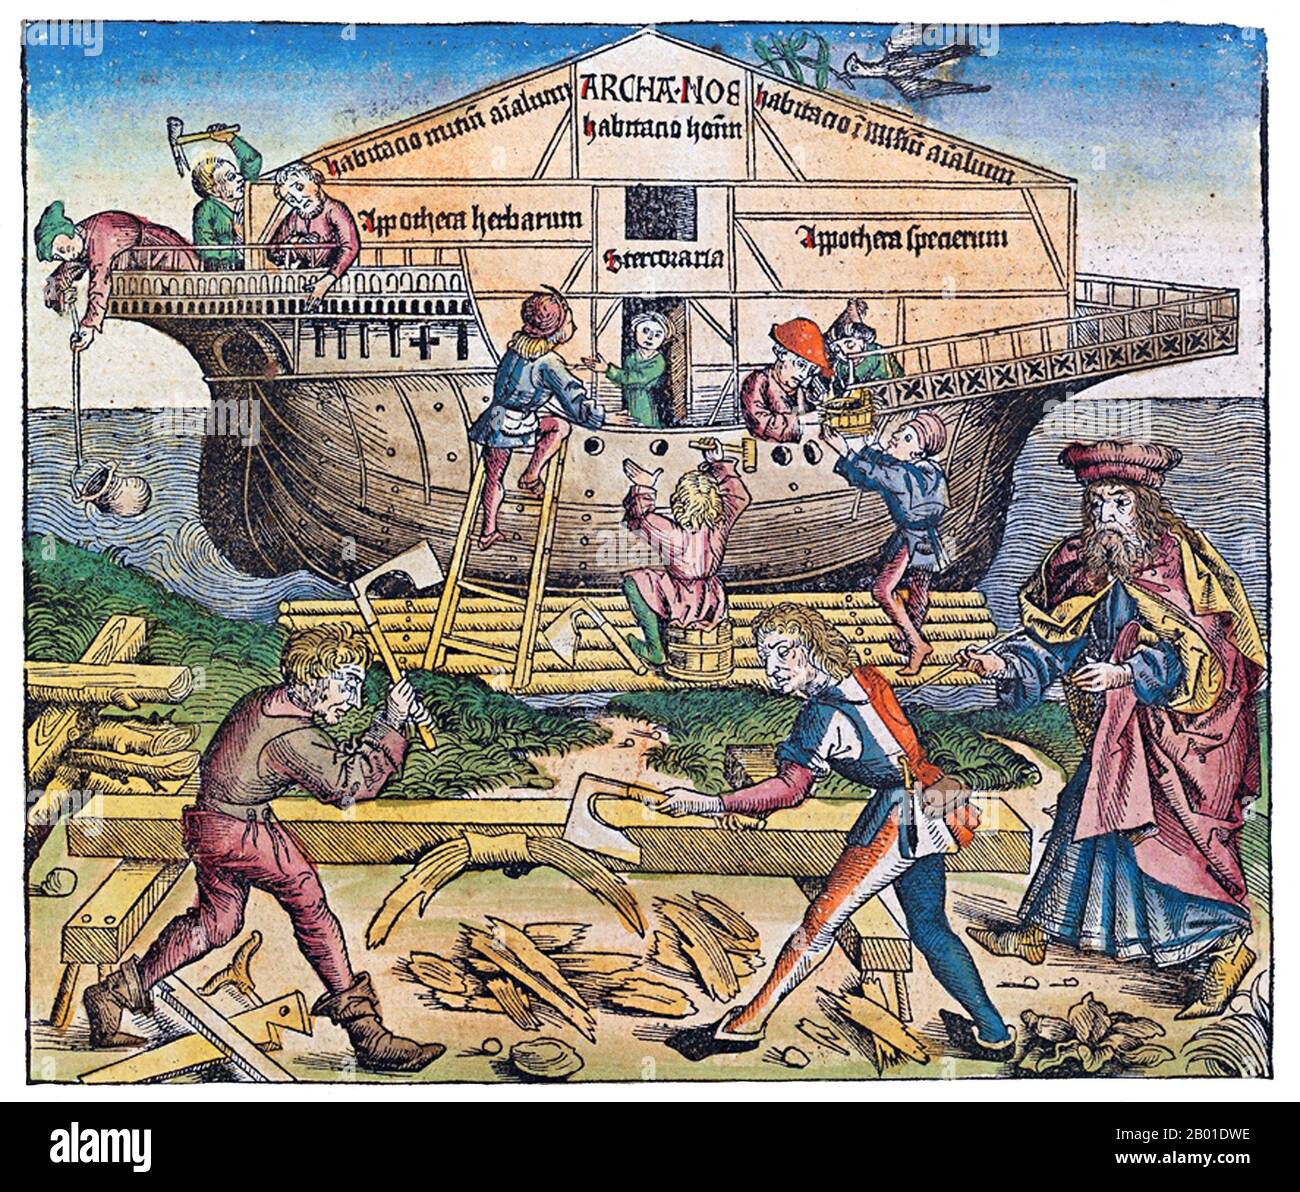 Germany: Noah supervising the construction of the ark as represented in the Nuremberg Chronicle, by Michael Wolgemut (1434-1519) and Wilhelm Pleydenwurff (1460-1494), 1493.  Noah (or Noe, Noach) was, according to the Hebrew Bible, the tenth and last of the antediluvian Patriarchs.  The biblical story of Noah is contained in chapters 6-9 of the book of Genesis, where he saves his family and representatives of all animals from the flood by constructing an ark. He is also mentioned as the 'first husbandman' and in the story of the Curse of Ham. Stock Photo